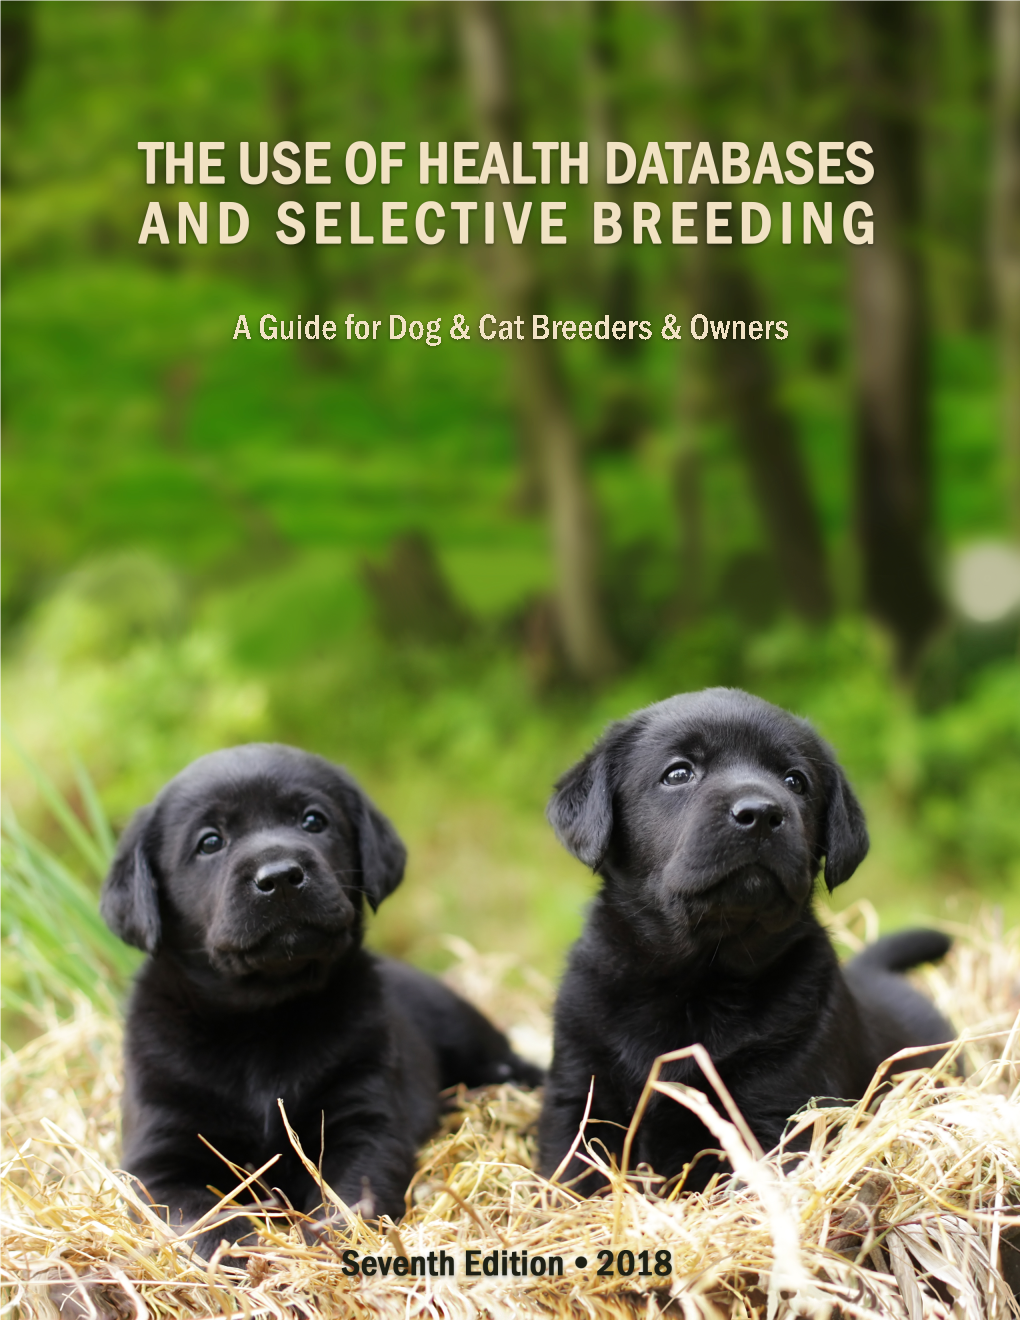 THE USE of HEALTH DATABASES and SELECTIVE BREEDING a Guide for Dog and Cat Breeders and Owners